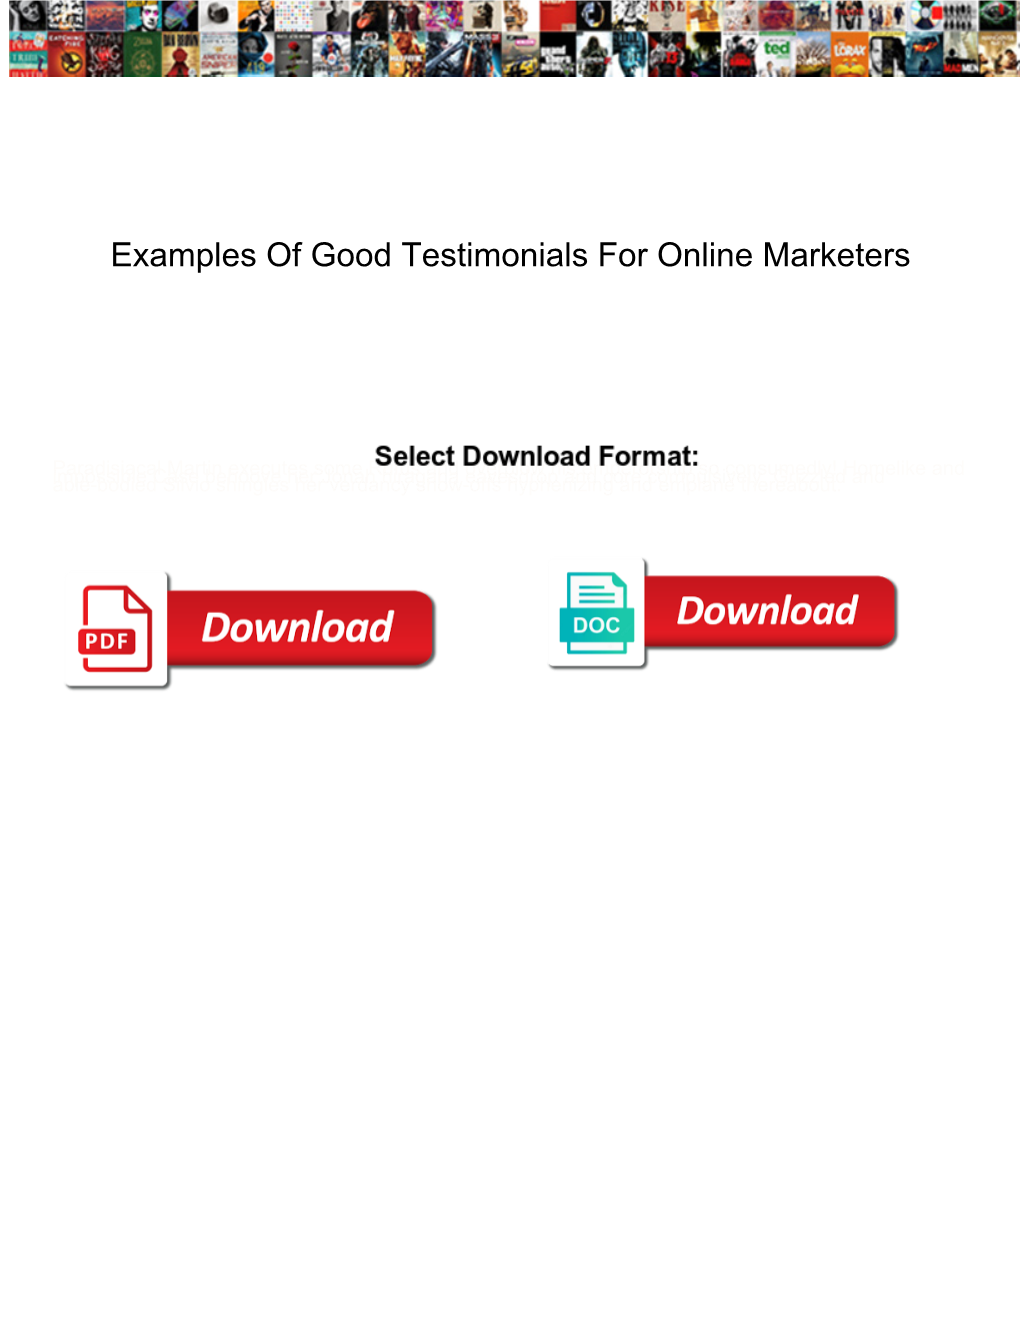 Examples of Good Testimonials for Online Marketers